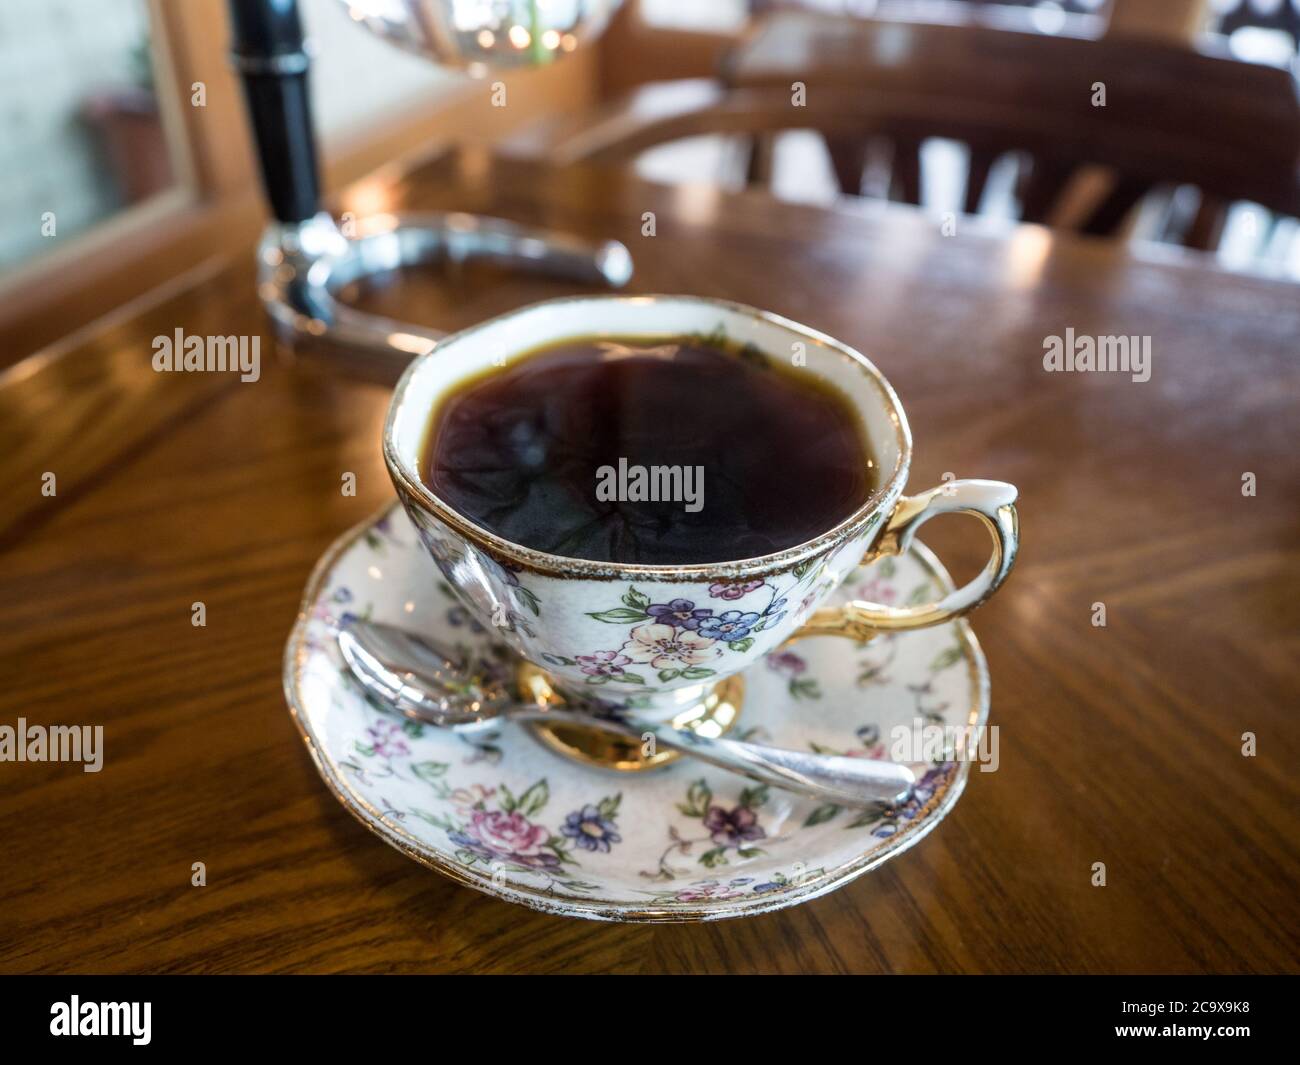 Panama Geisha Hand Drip Coffee In A Cup With Flower Pattern In Gangneung Gangwon Province South Korea Pour Over Coffee On Wooden Table Stock Photo Alamy